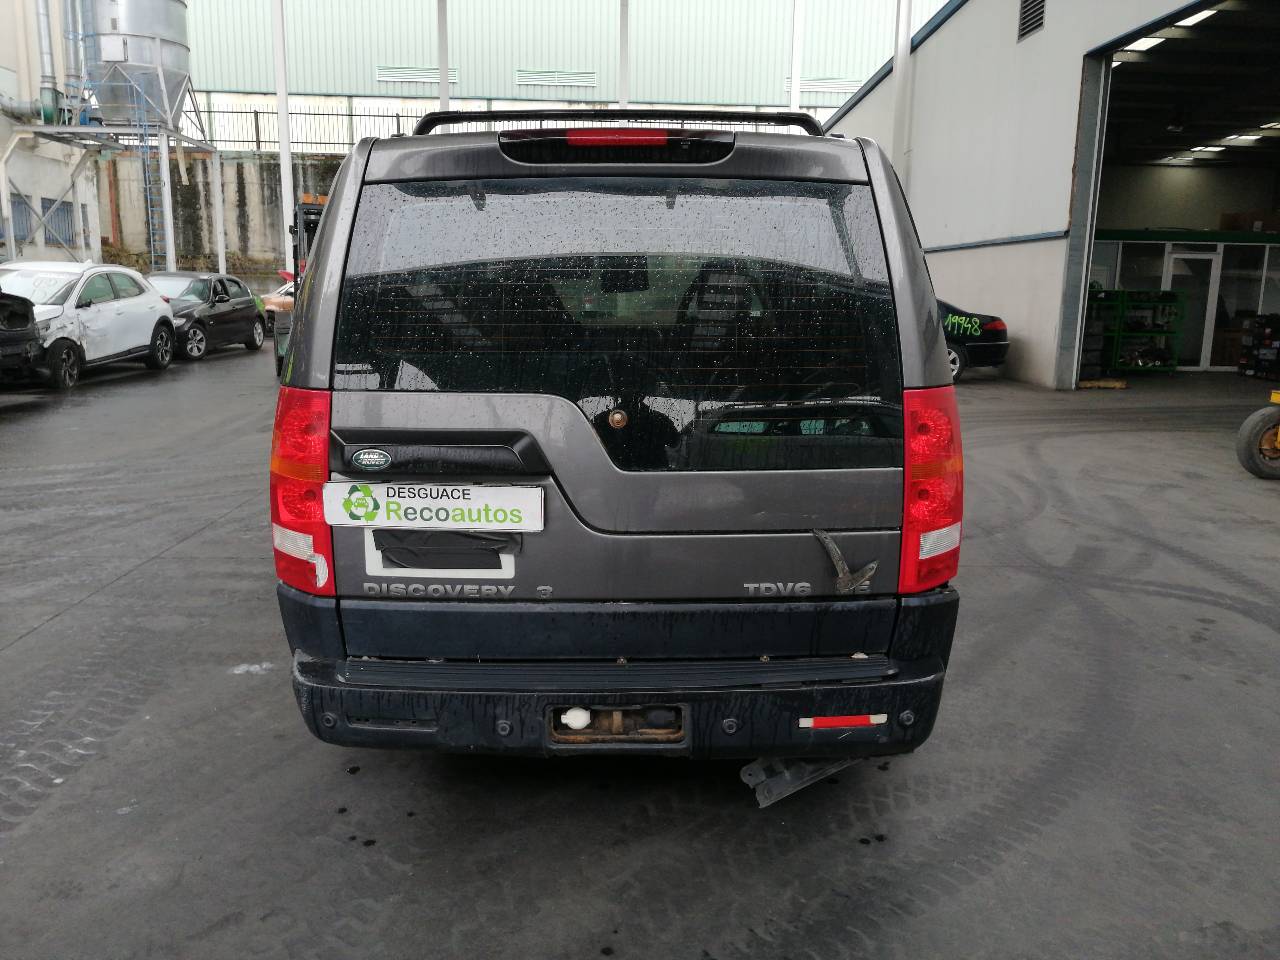 LAND ROVER Discovery 3 generation (2004-2009) Раздатка IAB500244, A0197838, 8452227091 24220522